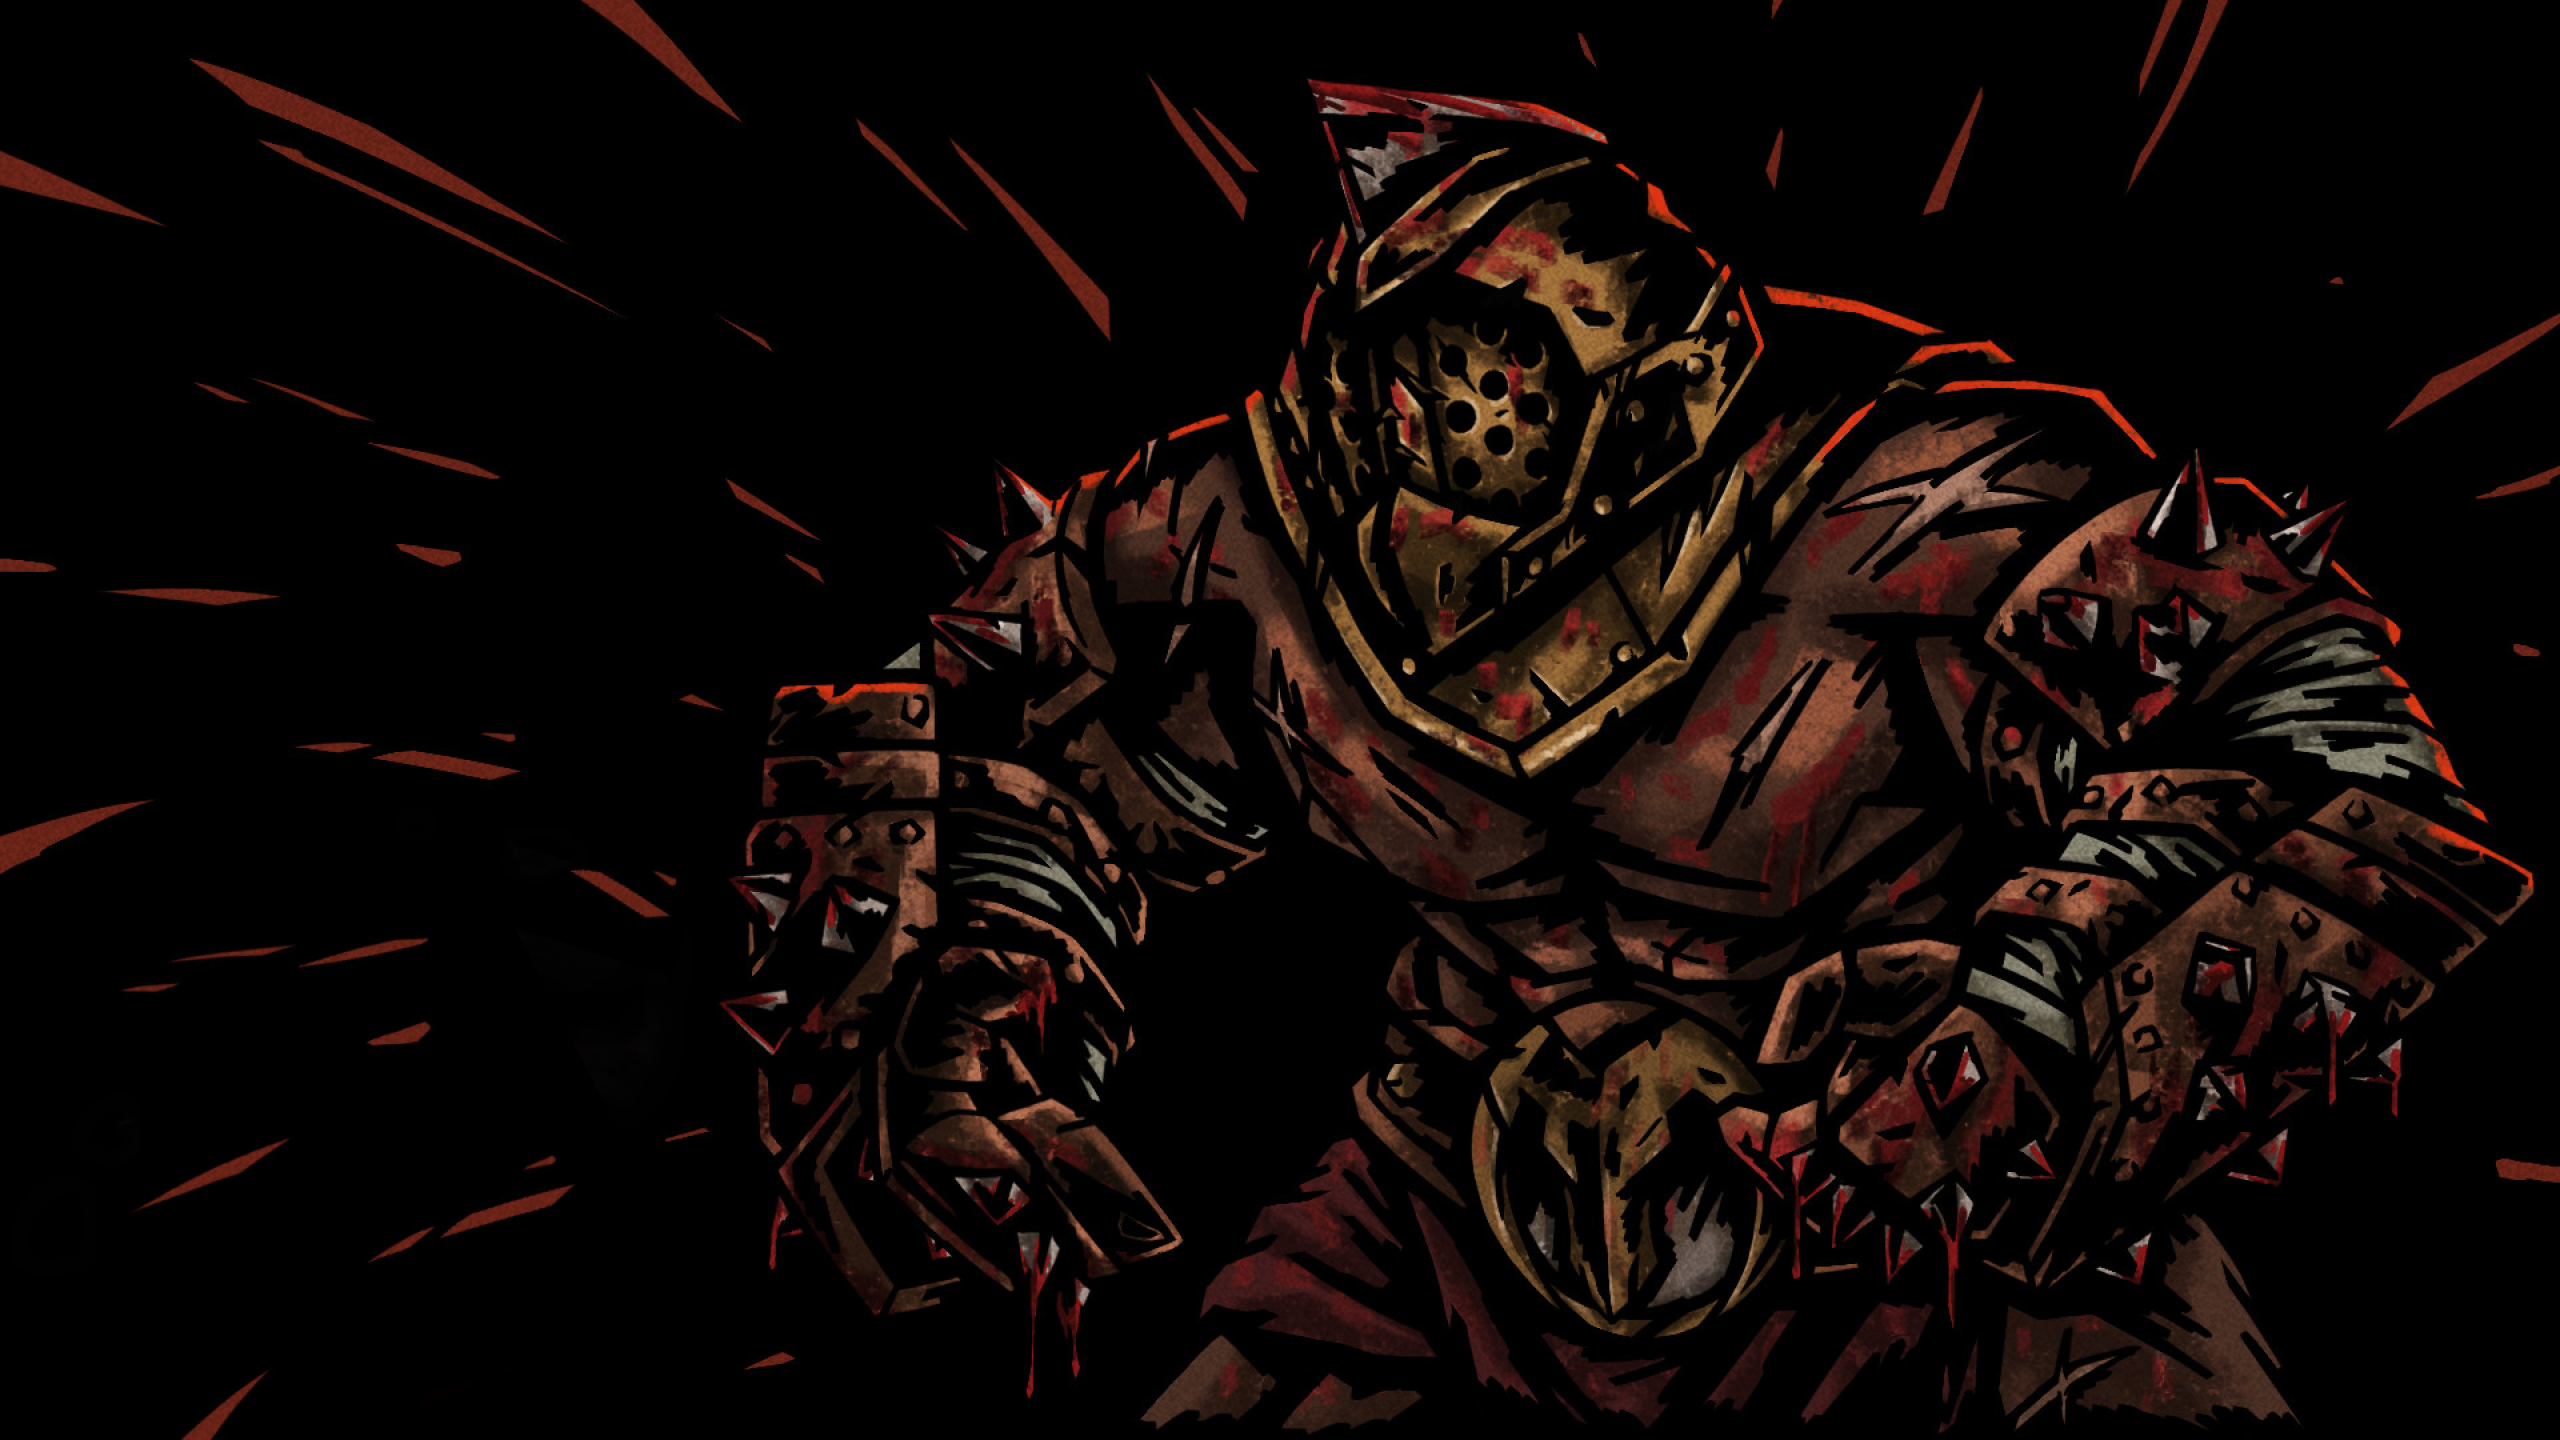 2560x1440 darkest dungeon art 1440p resolution wallpaper hd games 4k wallpapers images photos and background